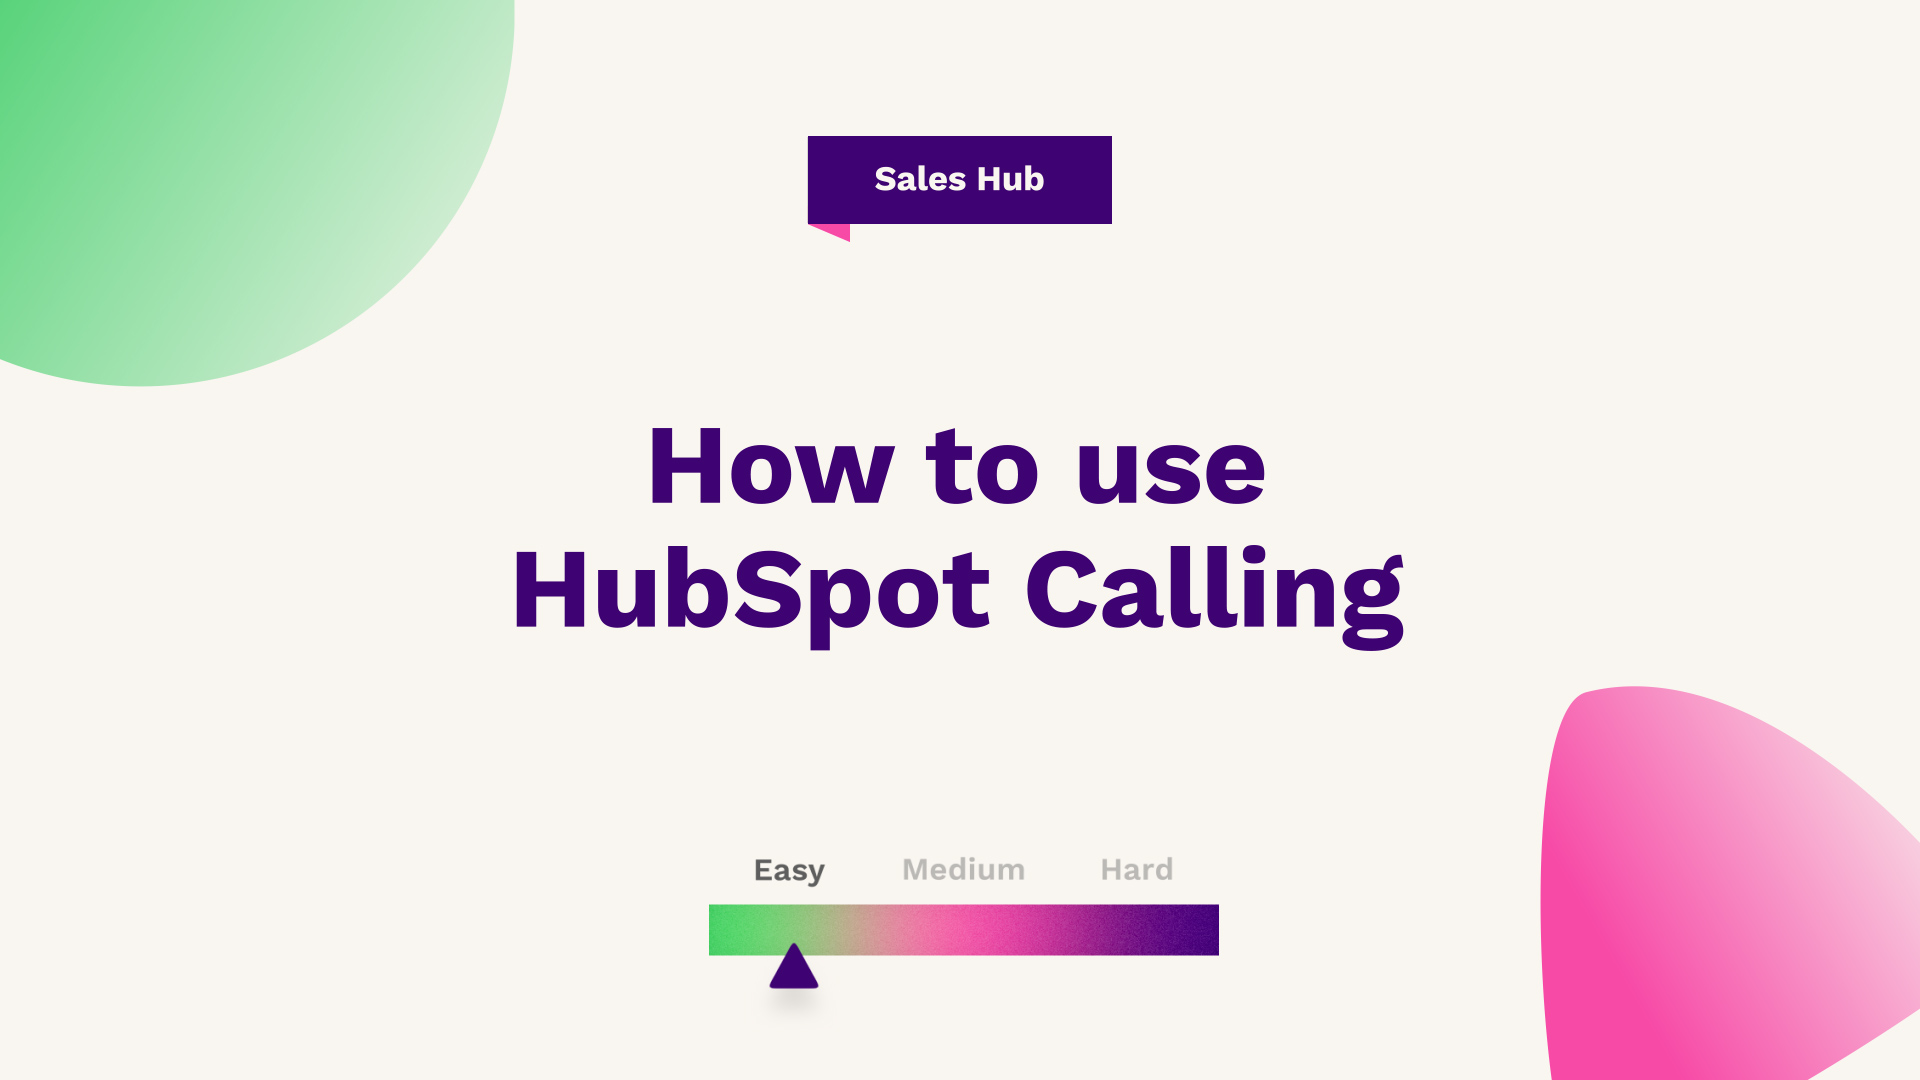 How to use HubSpot Calling